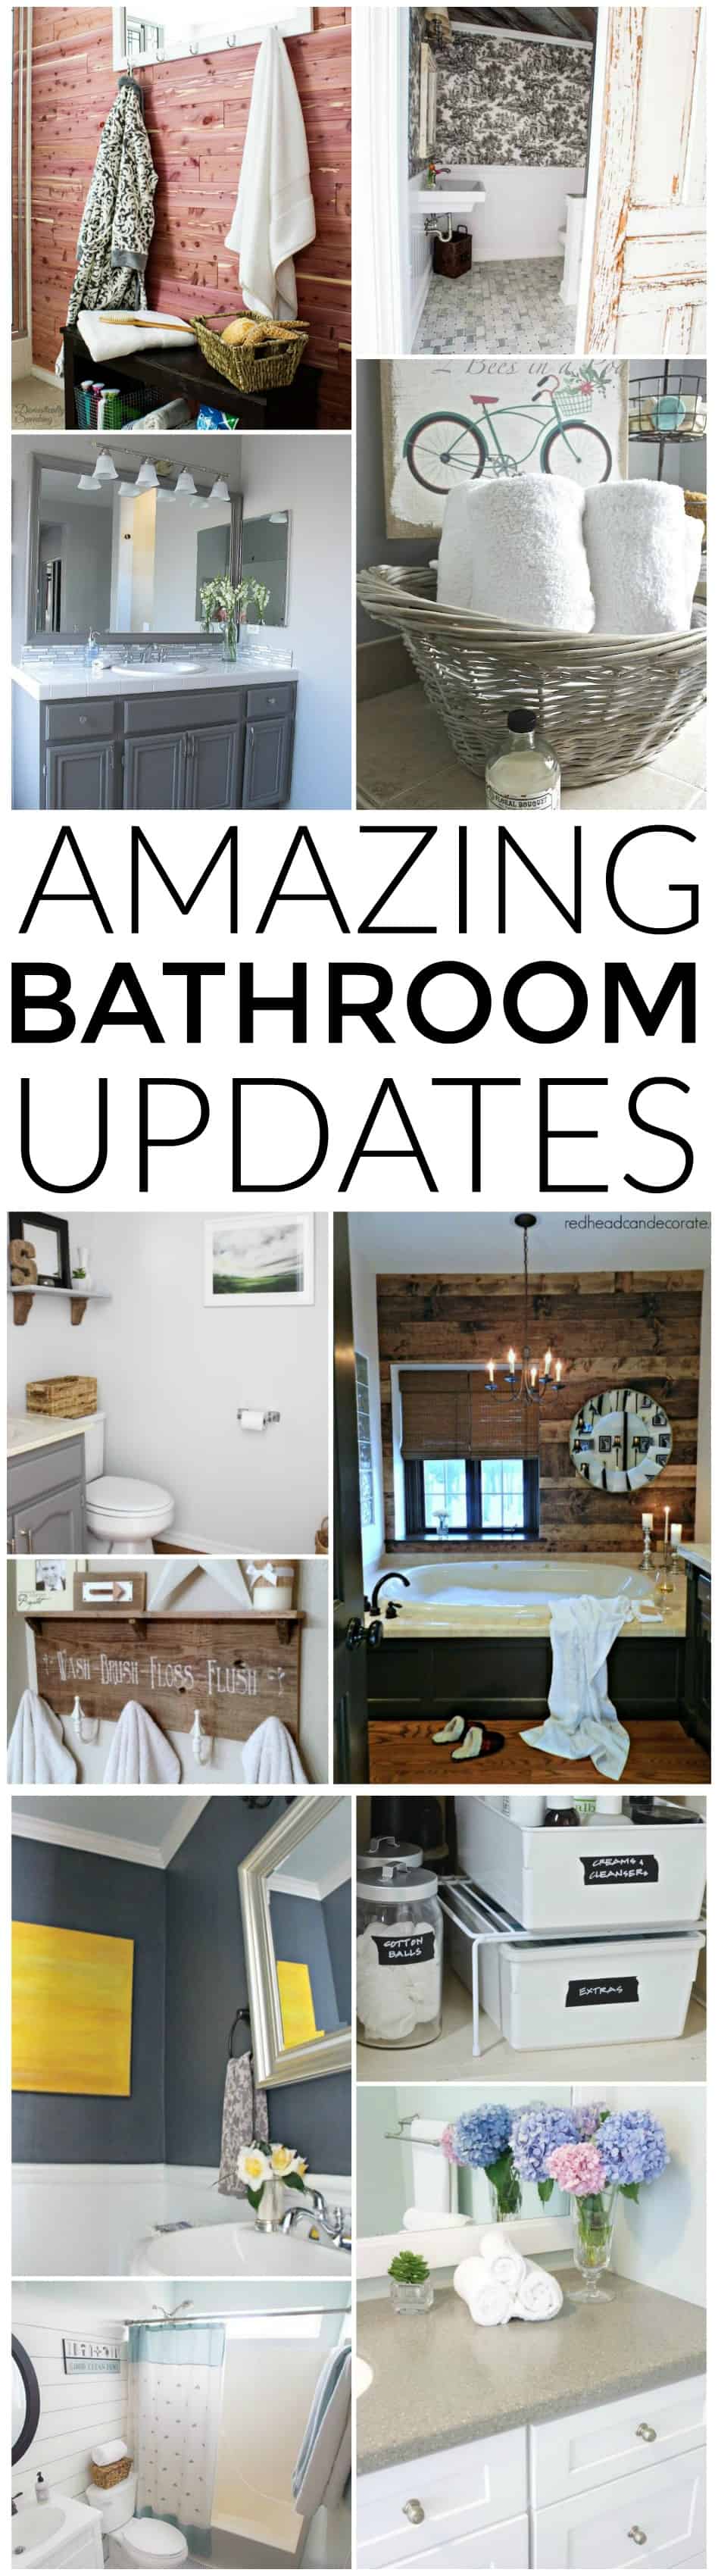 Amazing ideas for updating your bathroom... lots of great projects and DIYs.